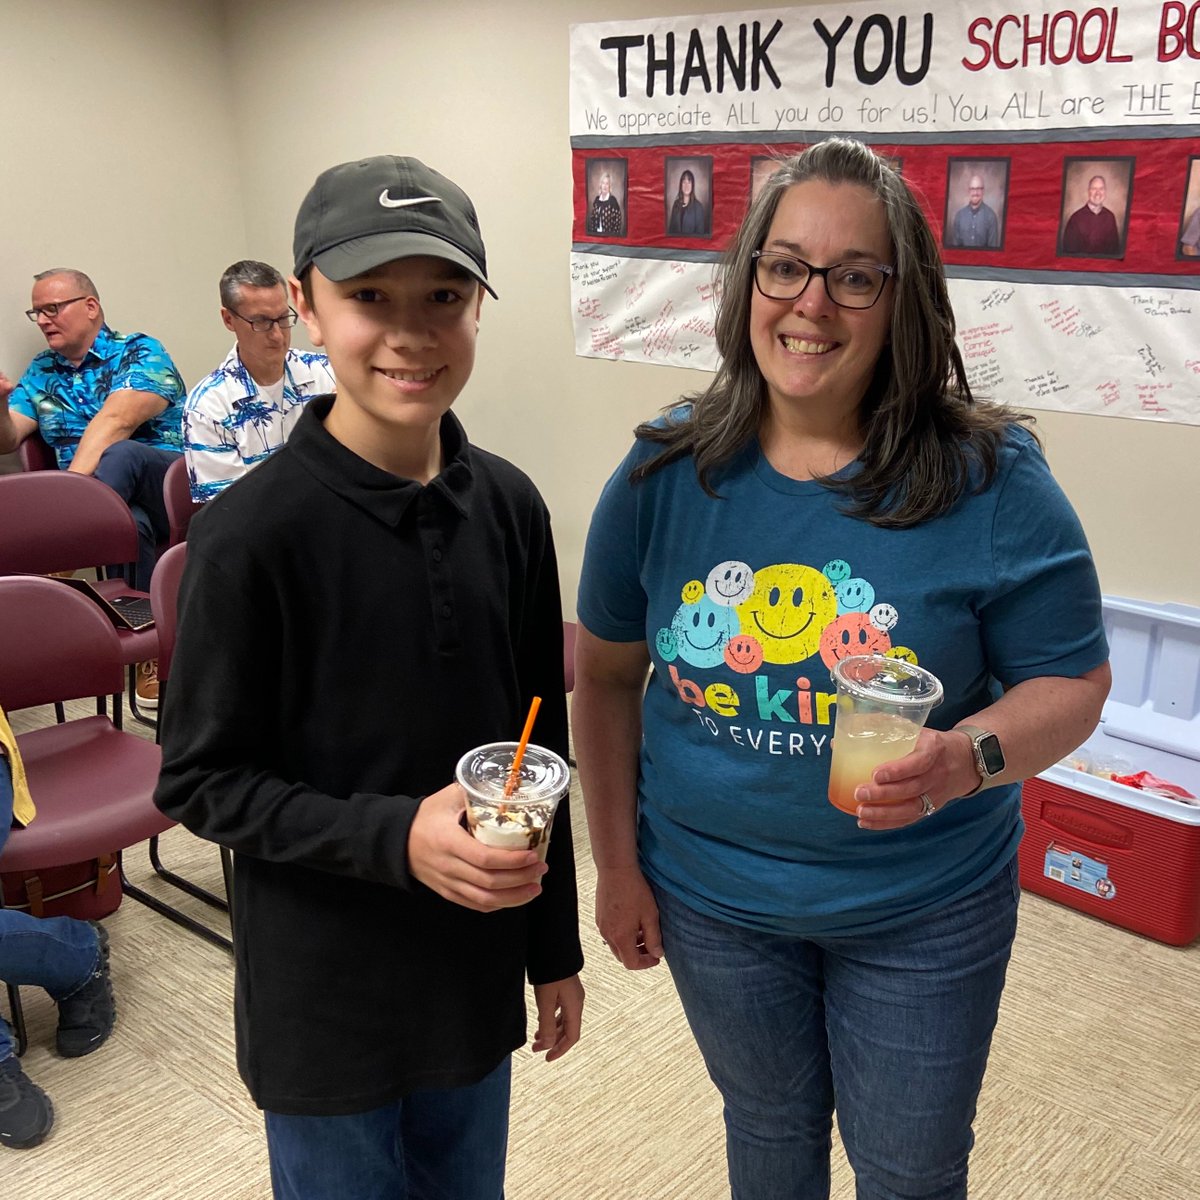 At last week's Board of Education meeting, Mrs. Speakman and Jackson W. showcased skills students learn at LRHS' Common Grounds Coffee Shop. They also graciously provided samples for board members and attendees to enjoy! #WeAreLR